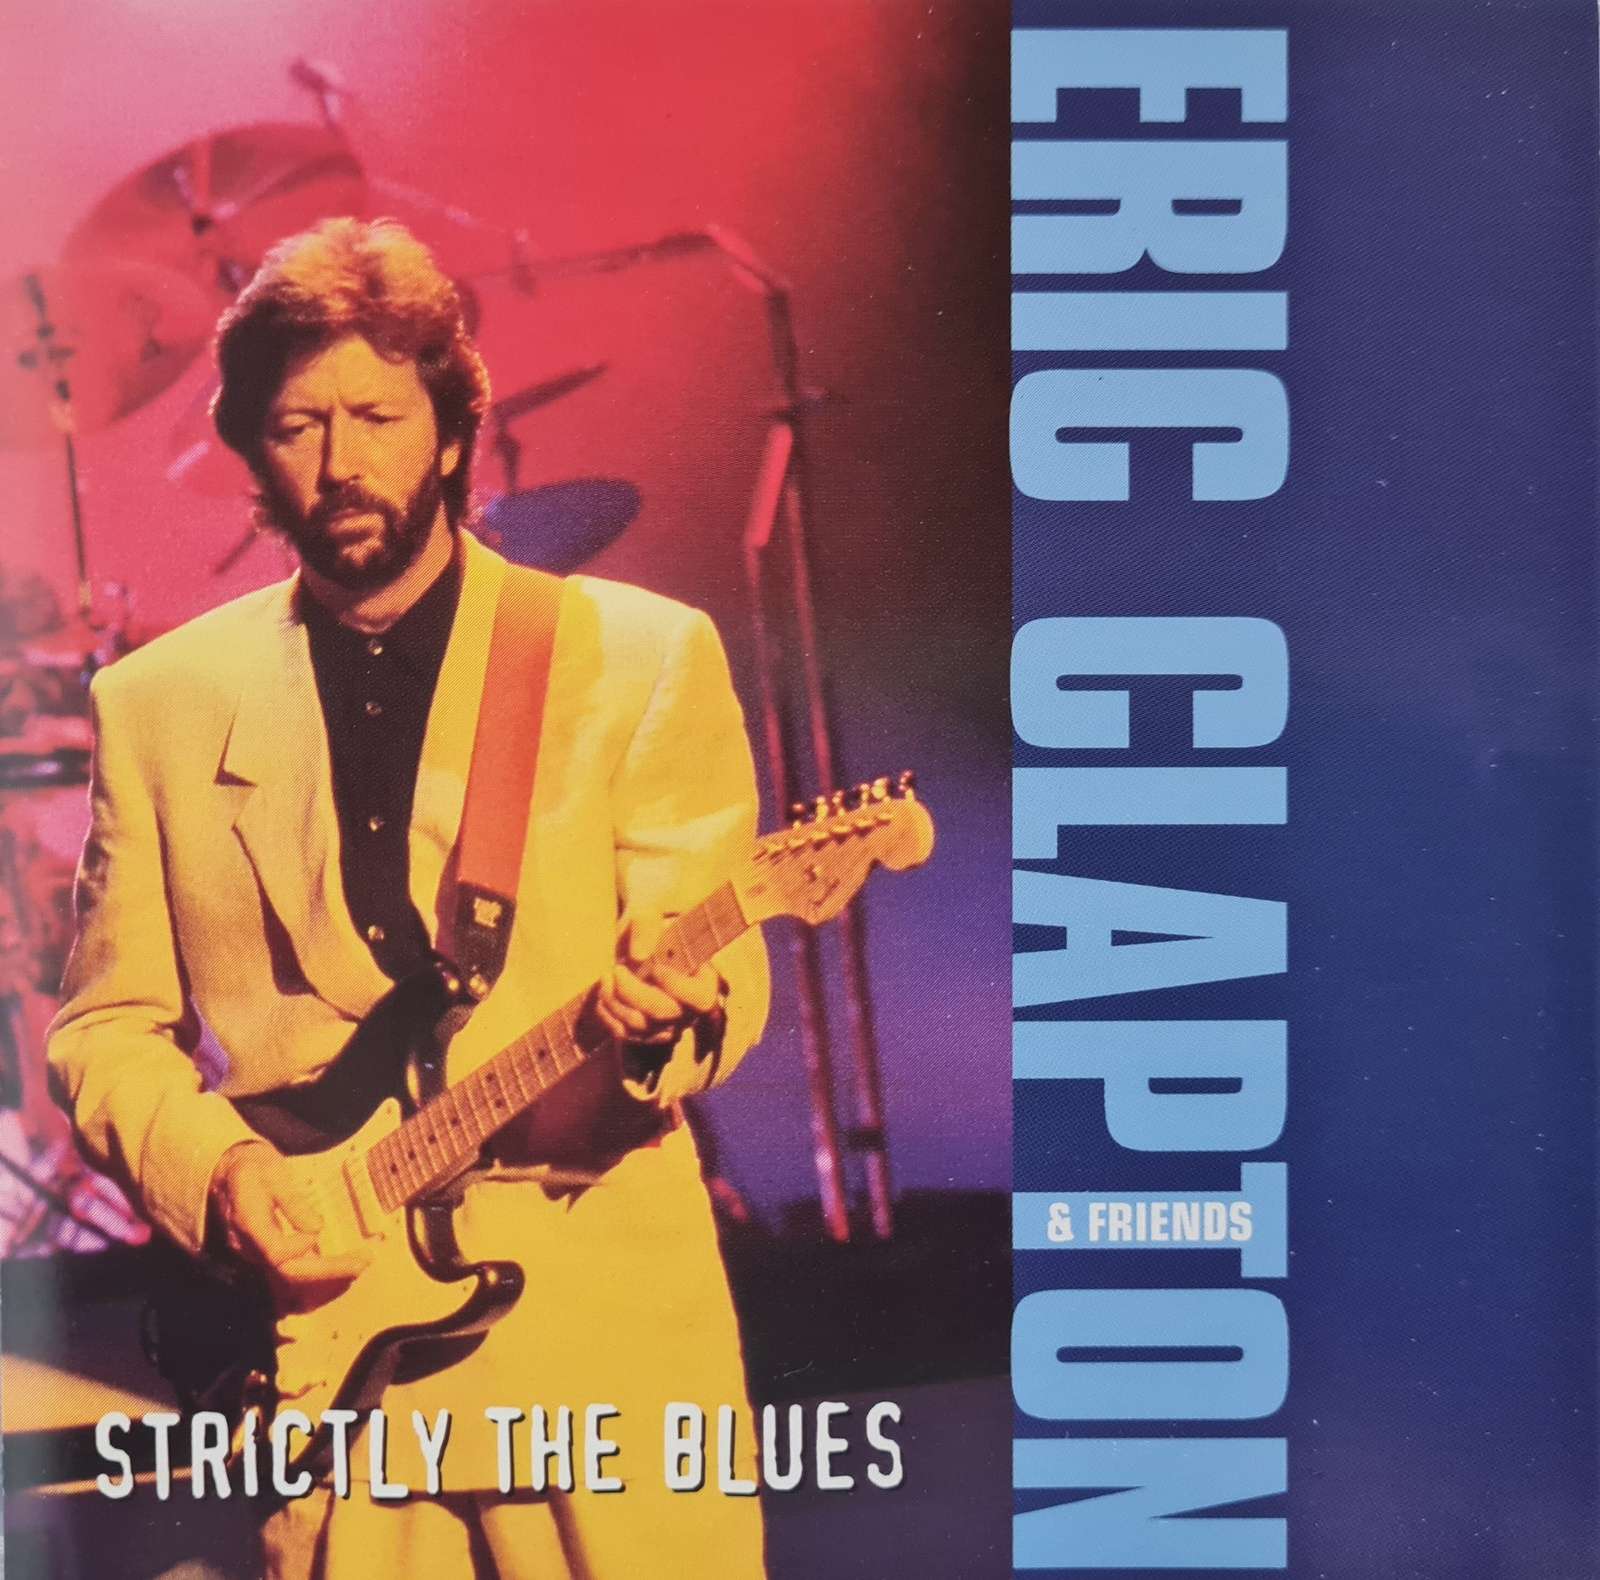 Eric Clapton & Friends - Strictly the Blues (CD)